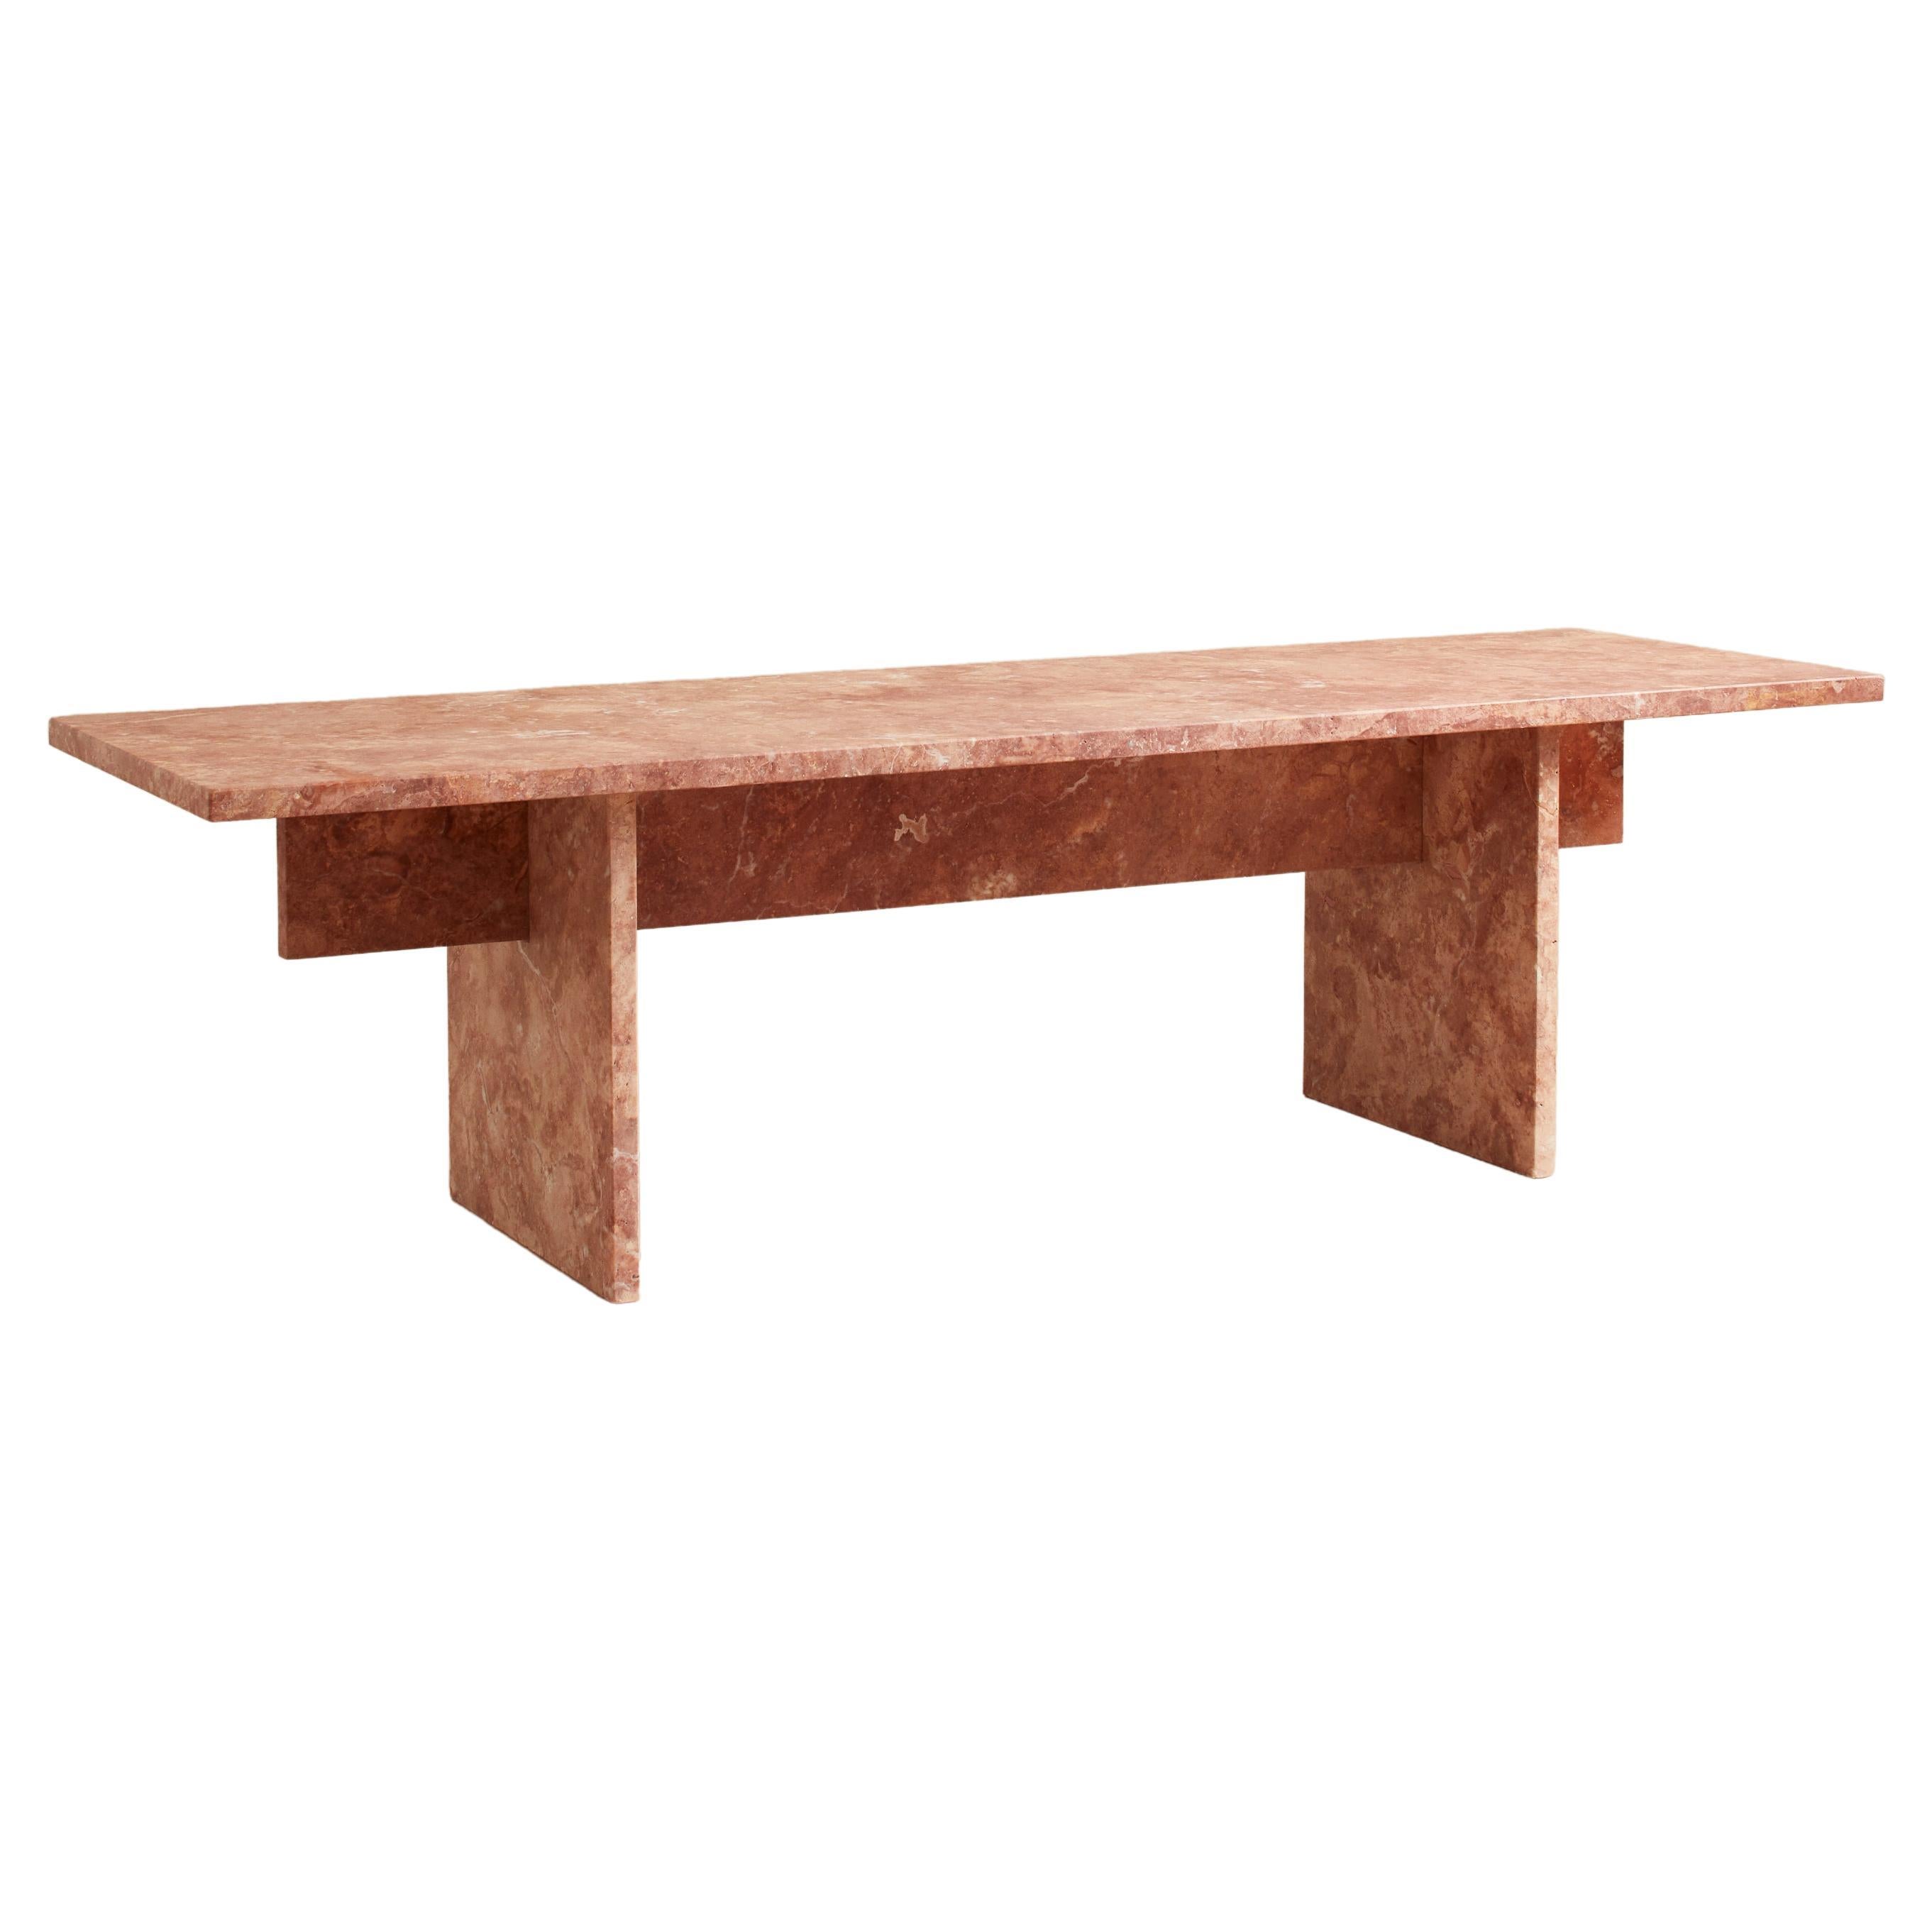 Vondel Coffee Table Handcrafted in Honed Red Travertine